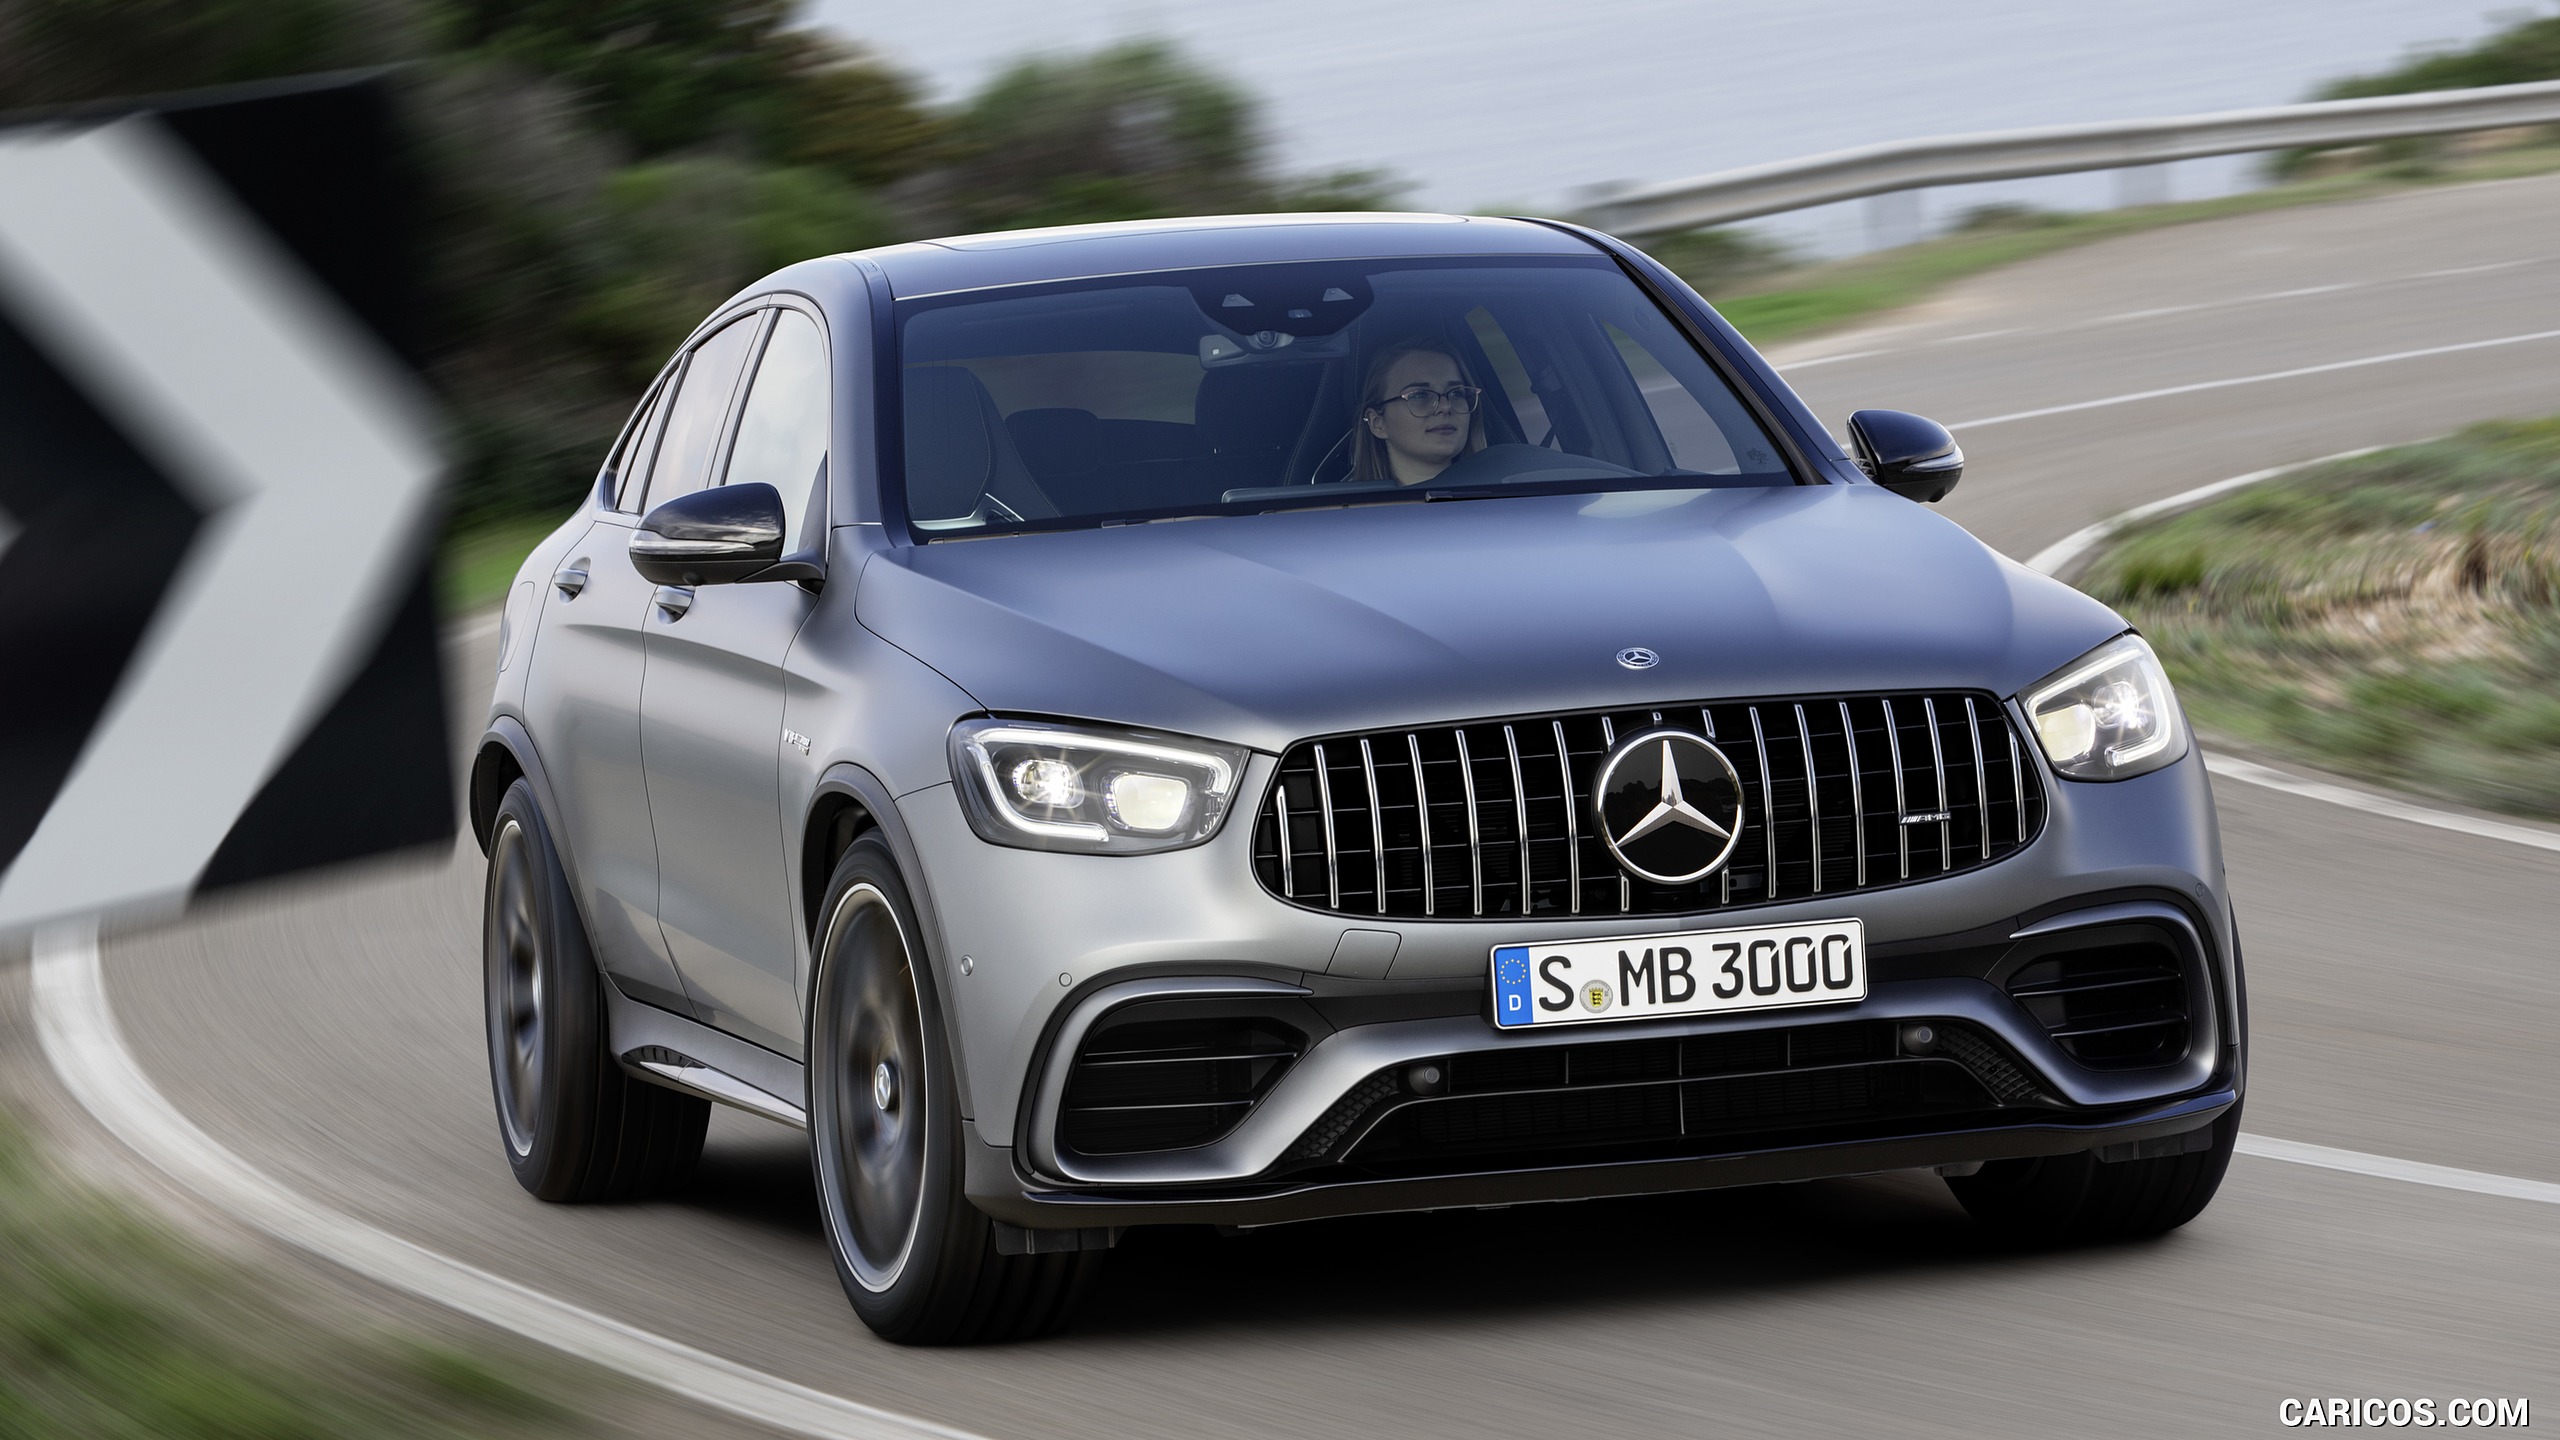 2020 Mercedes-AMG GLC 63 S 4MATIC+ Coupe - Front, #3 of 102